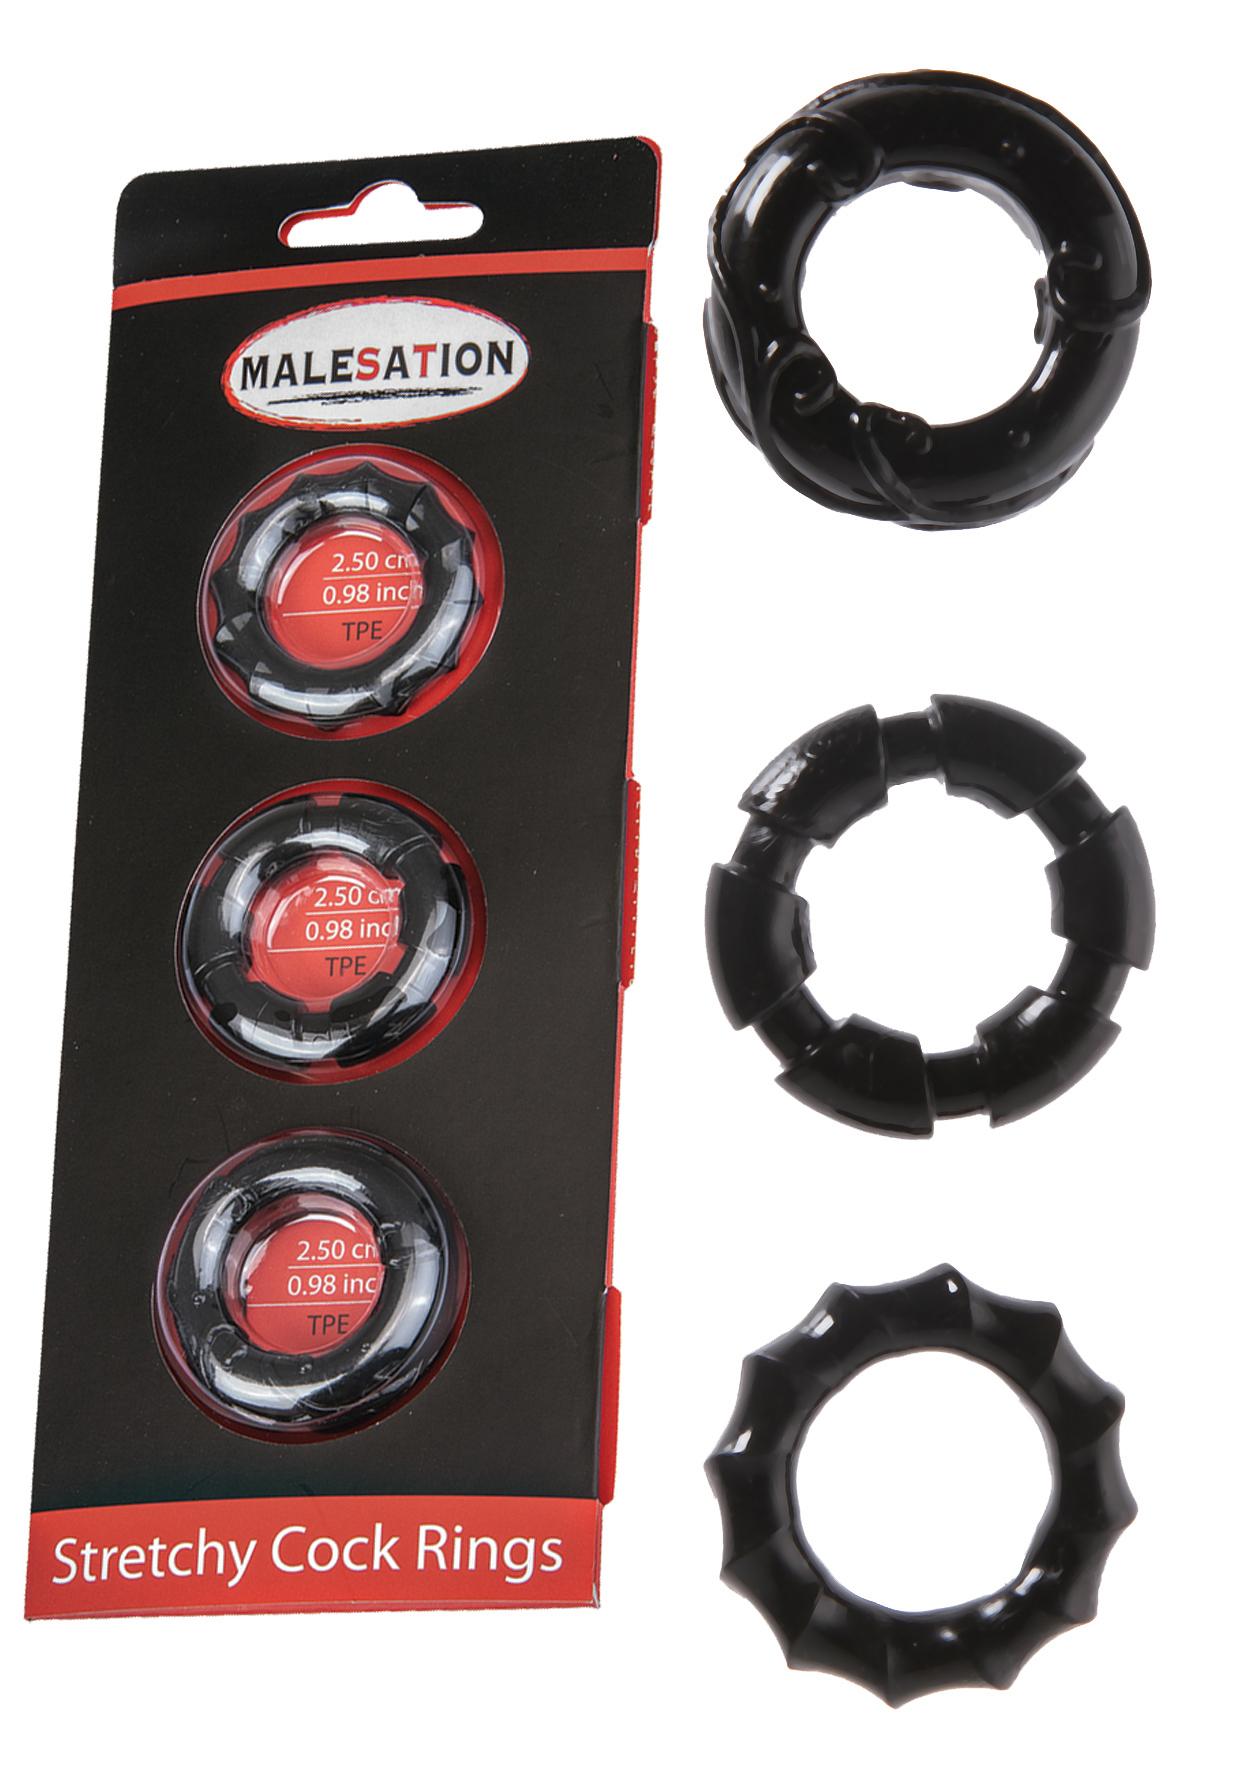 "MALESATION Stretchy Cock Rings"